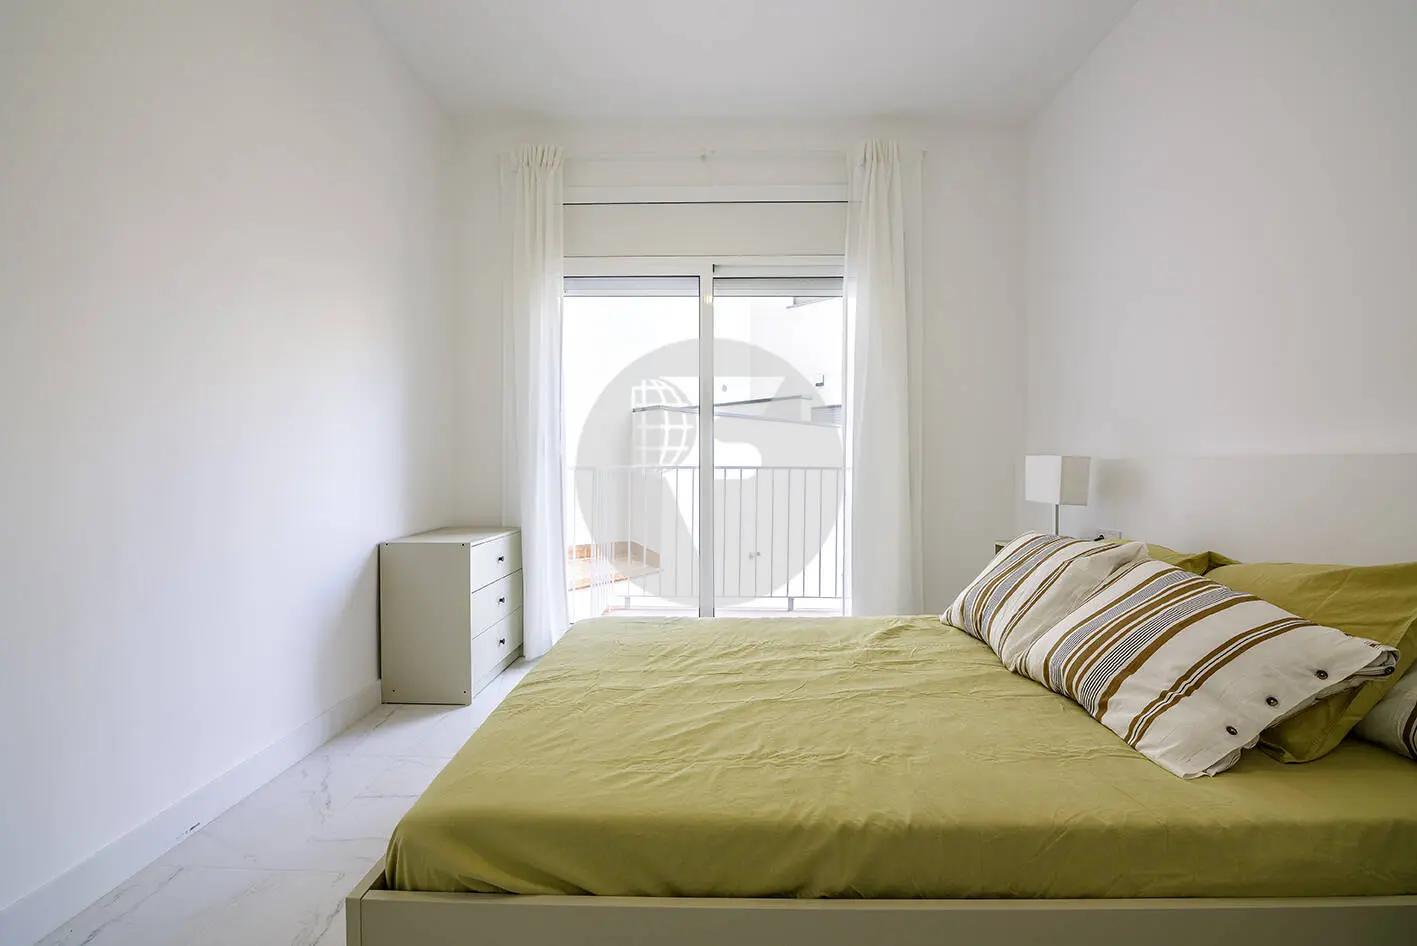 Brand new completely renovated apartment on Aragó street in the heart of El Clot in Barcelona. 34